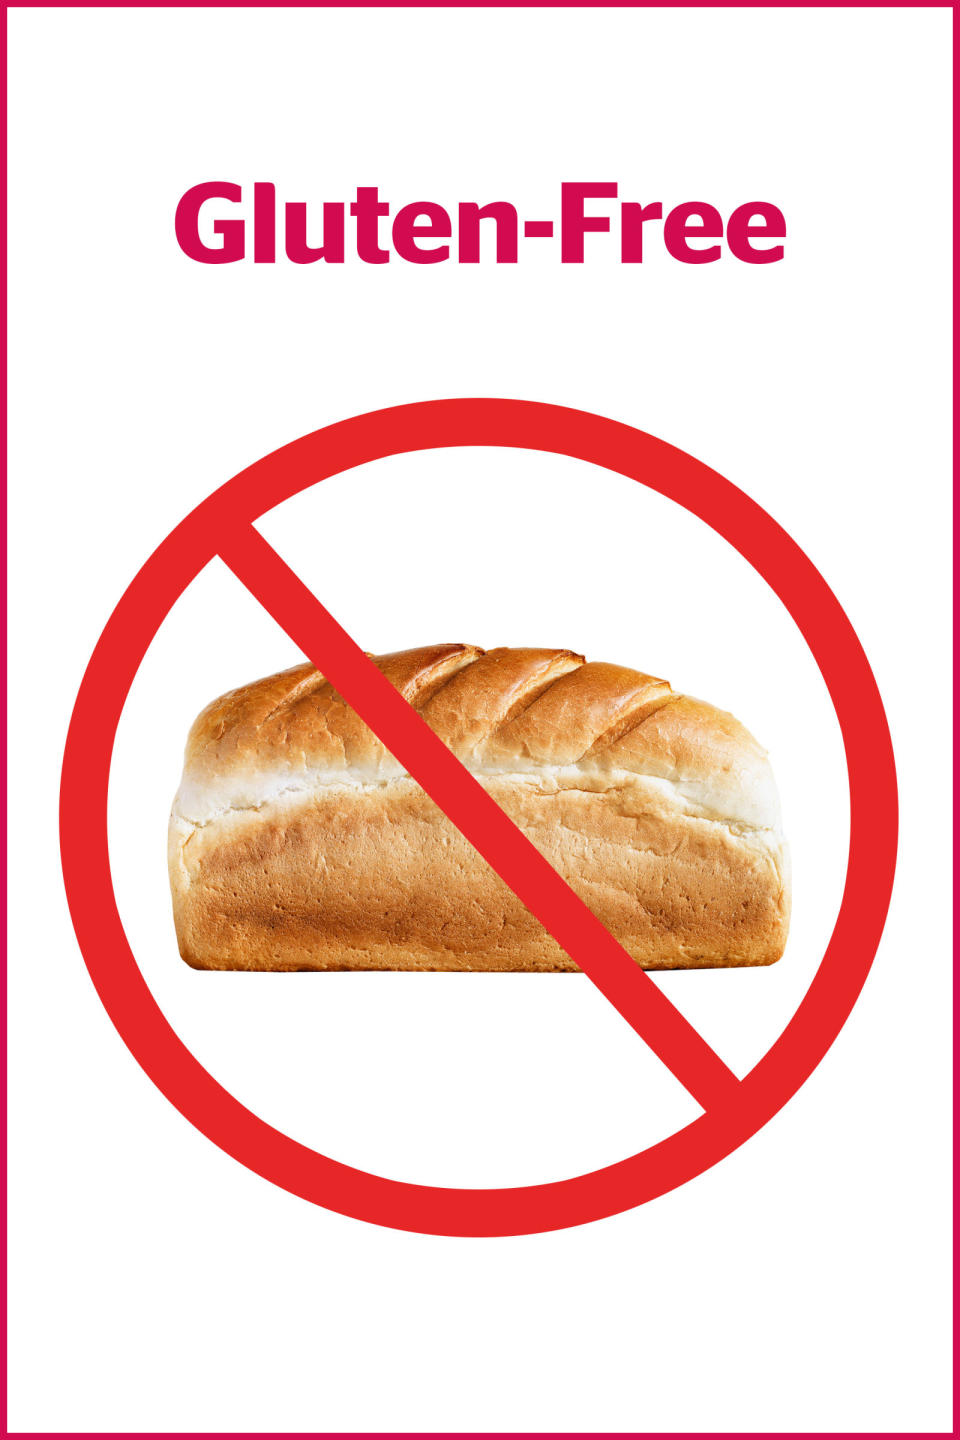 1) A Gluten-Free Diet is Probably A Waste of Time